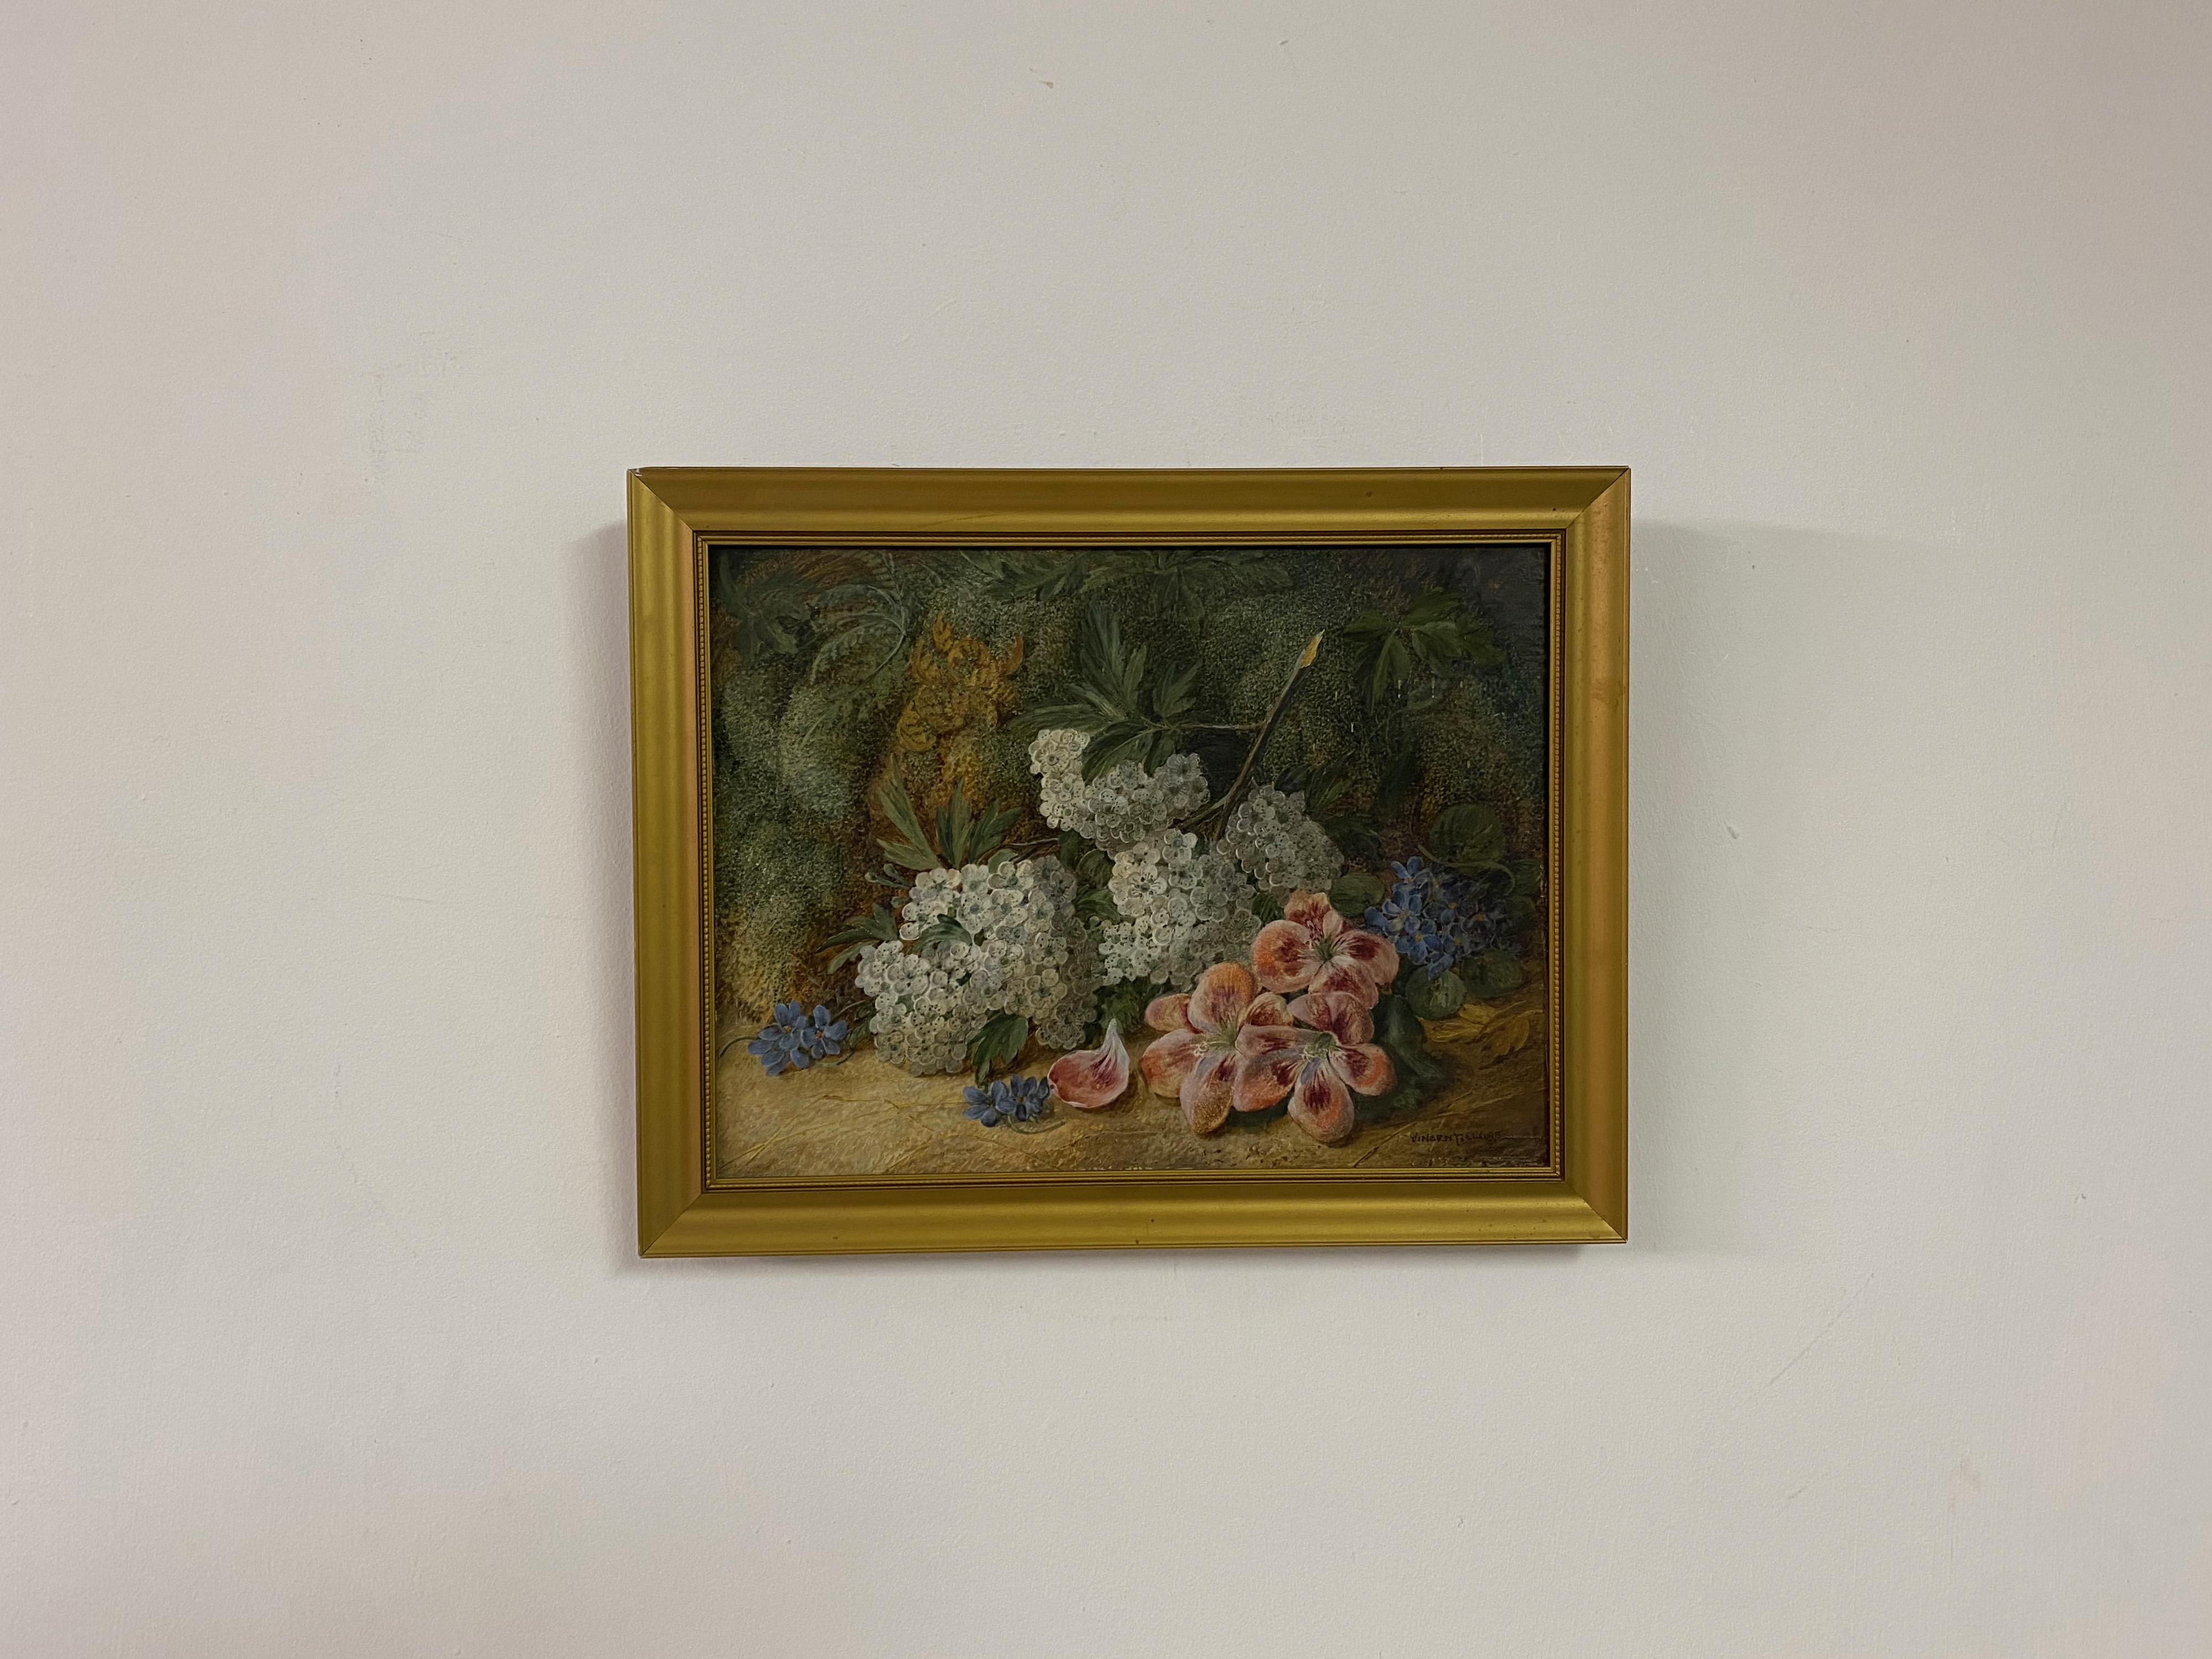 Still life

Oil on canvas

Hawthorns, blossoms and flowers

Gold frame

By Vincent Clare

Signed bottom right

Early 20th Century